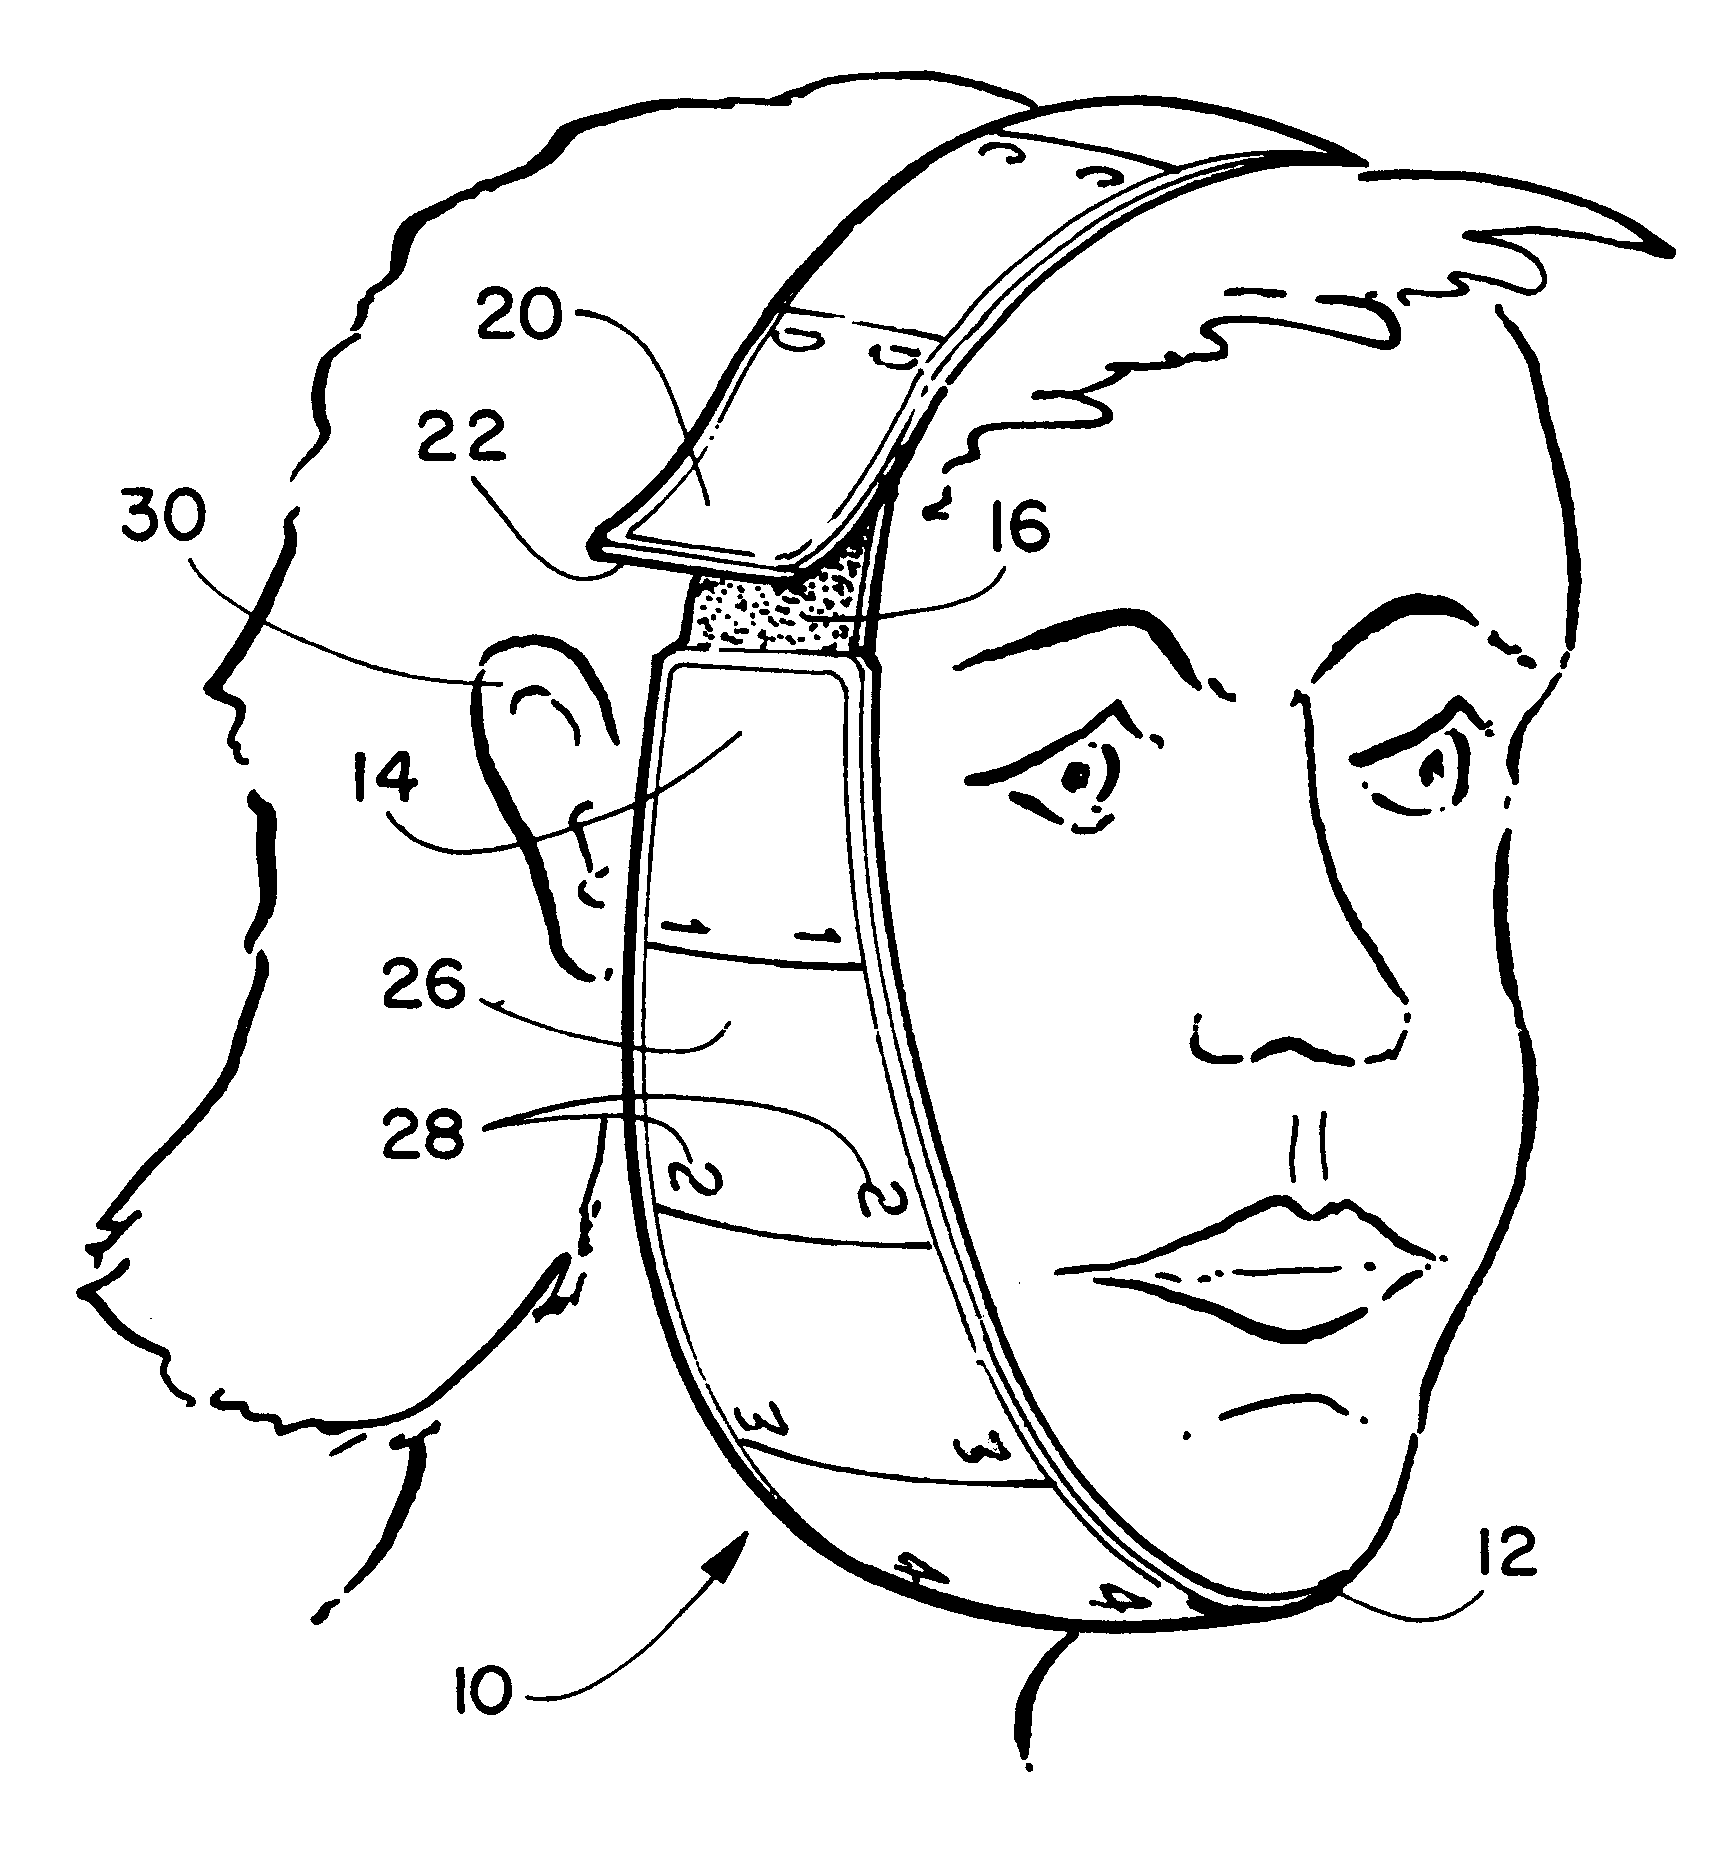 Facial exercise device with adjustment for variable resistance